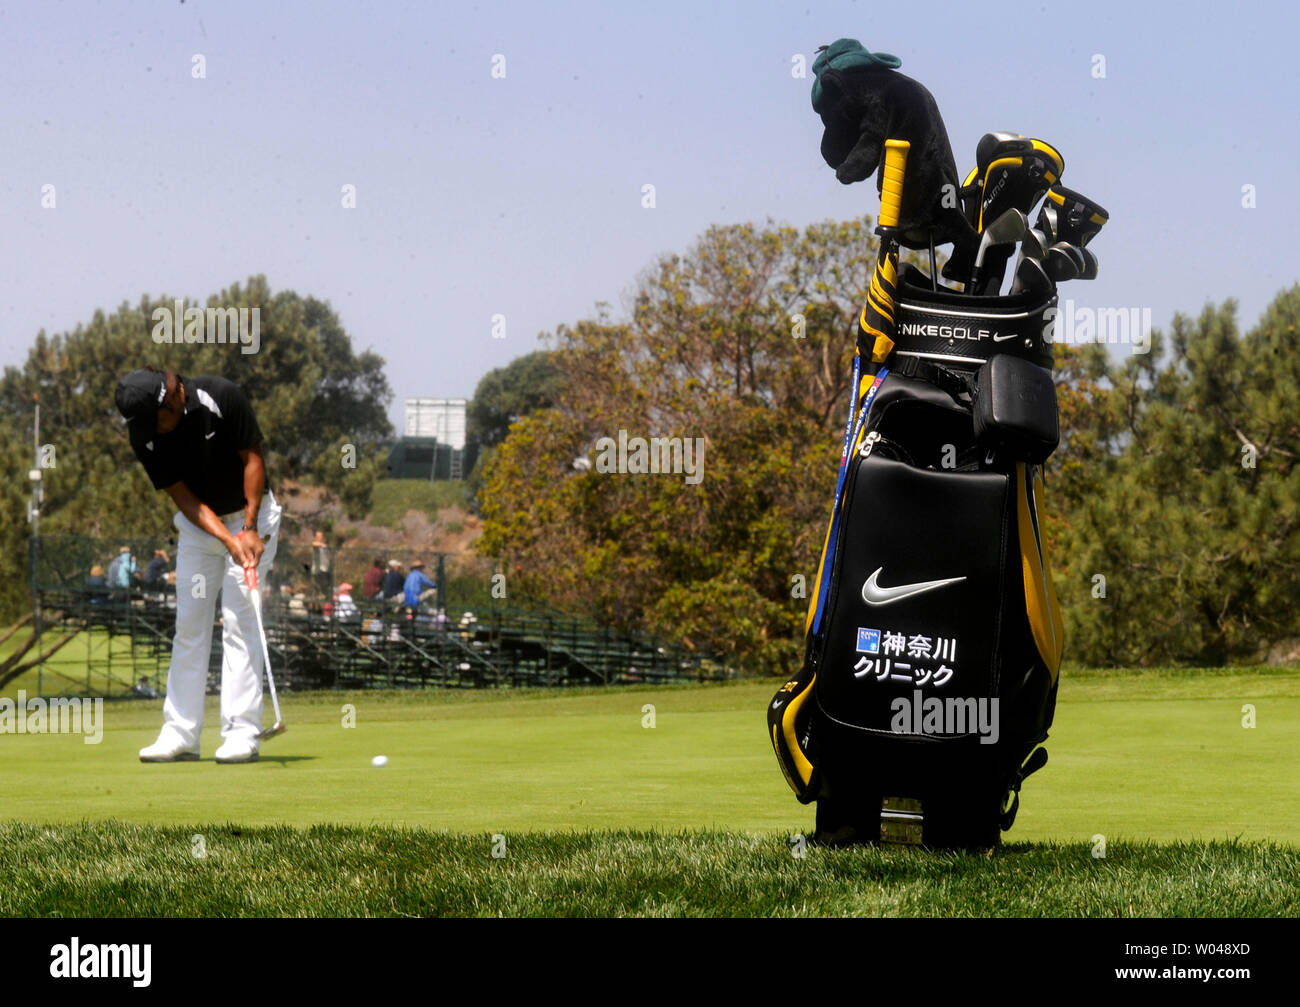 Japanese golfer Shingo Katayama's golf bag is seen on the 8th green as he putts in the background during a practice round prior to the 2008 U.S. Open at Torrey Pines Golf Course in San Diego on June 11, 2008. (UPI Photo/Kevin Dietsch) Stock Photo